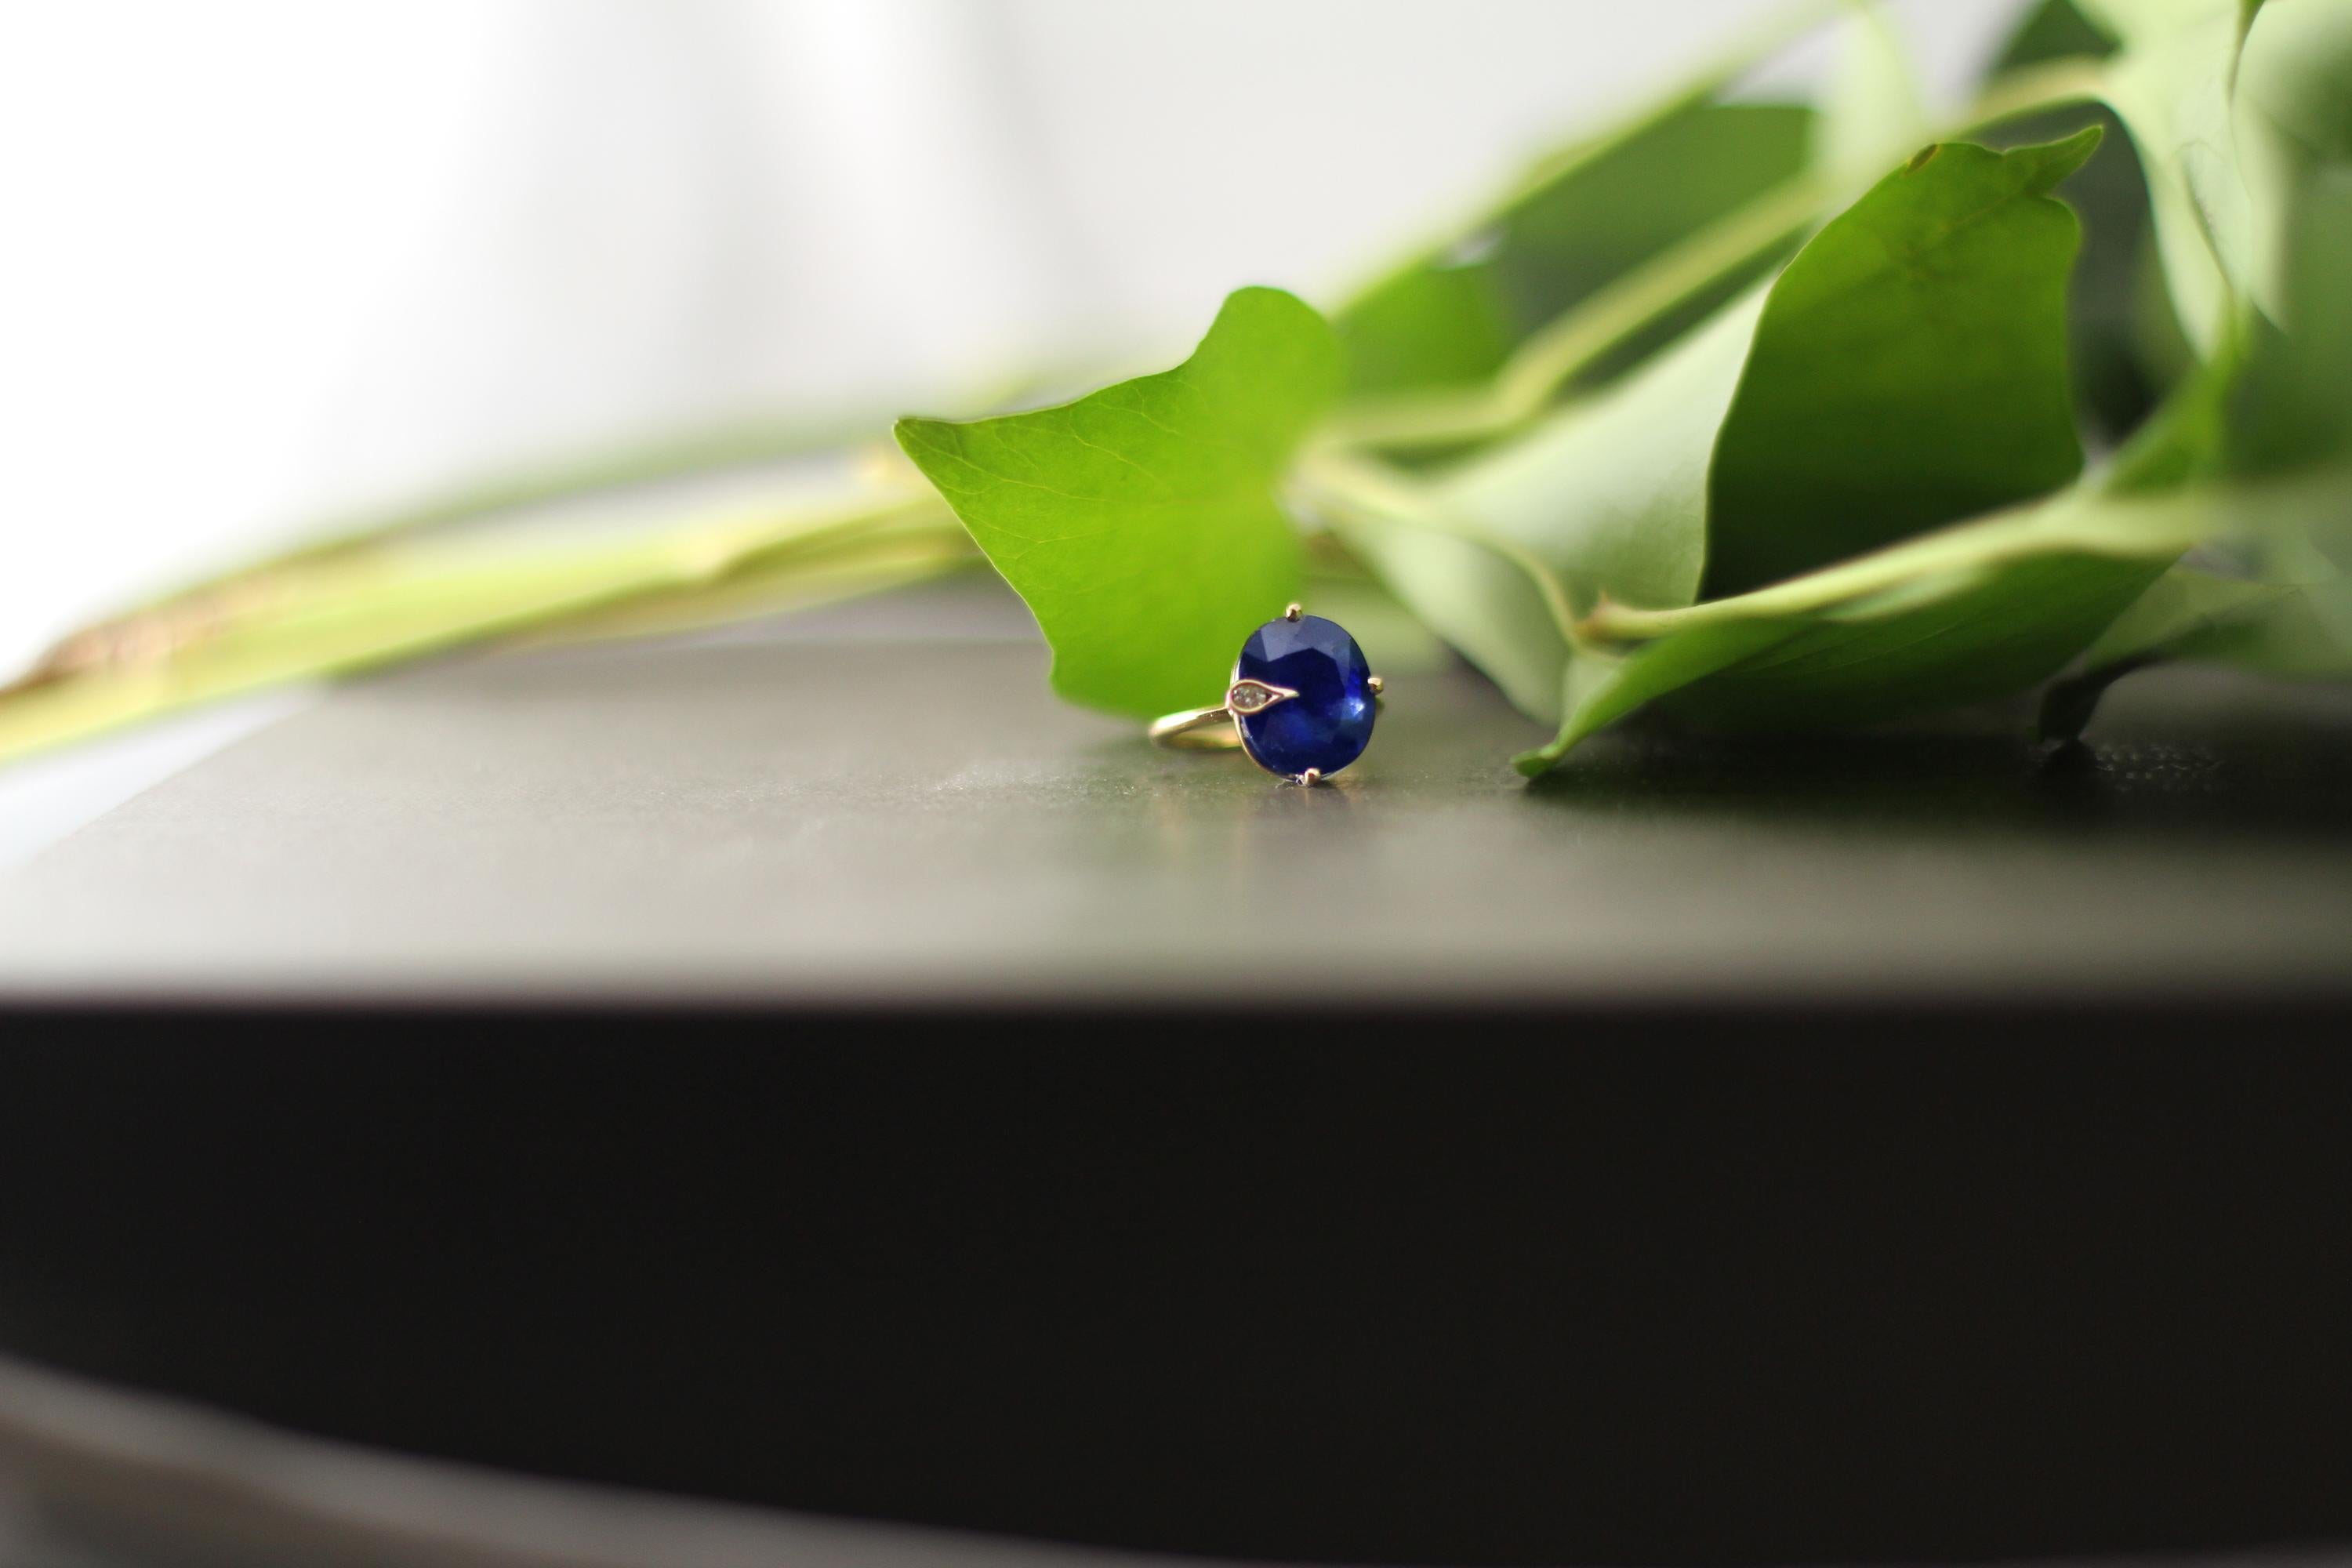 This contemporary Peacock engagement ring is in 18 karat yellow gold with unheated untreated natural oval vivid blue sapphire Lotus Laboratory certified, 10,77x9,16x5,12 mm from Madagascar. It can also be GIA certified upon request. The ring is easy